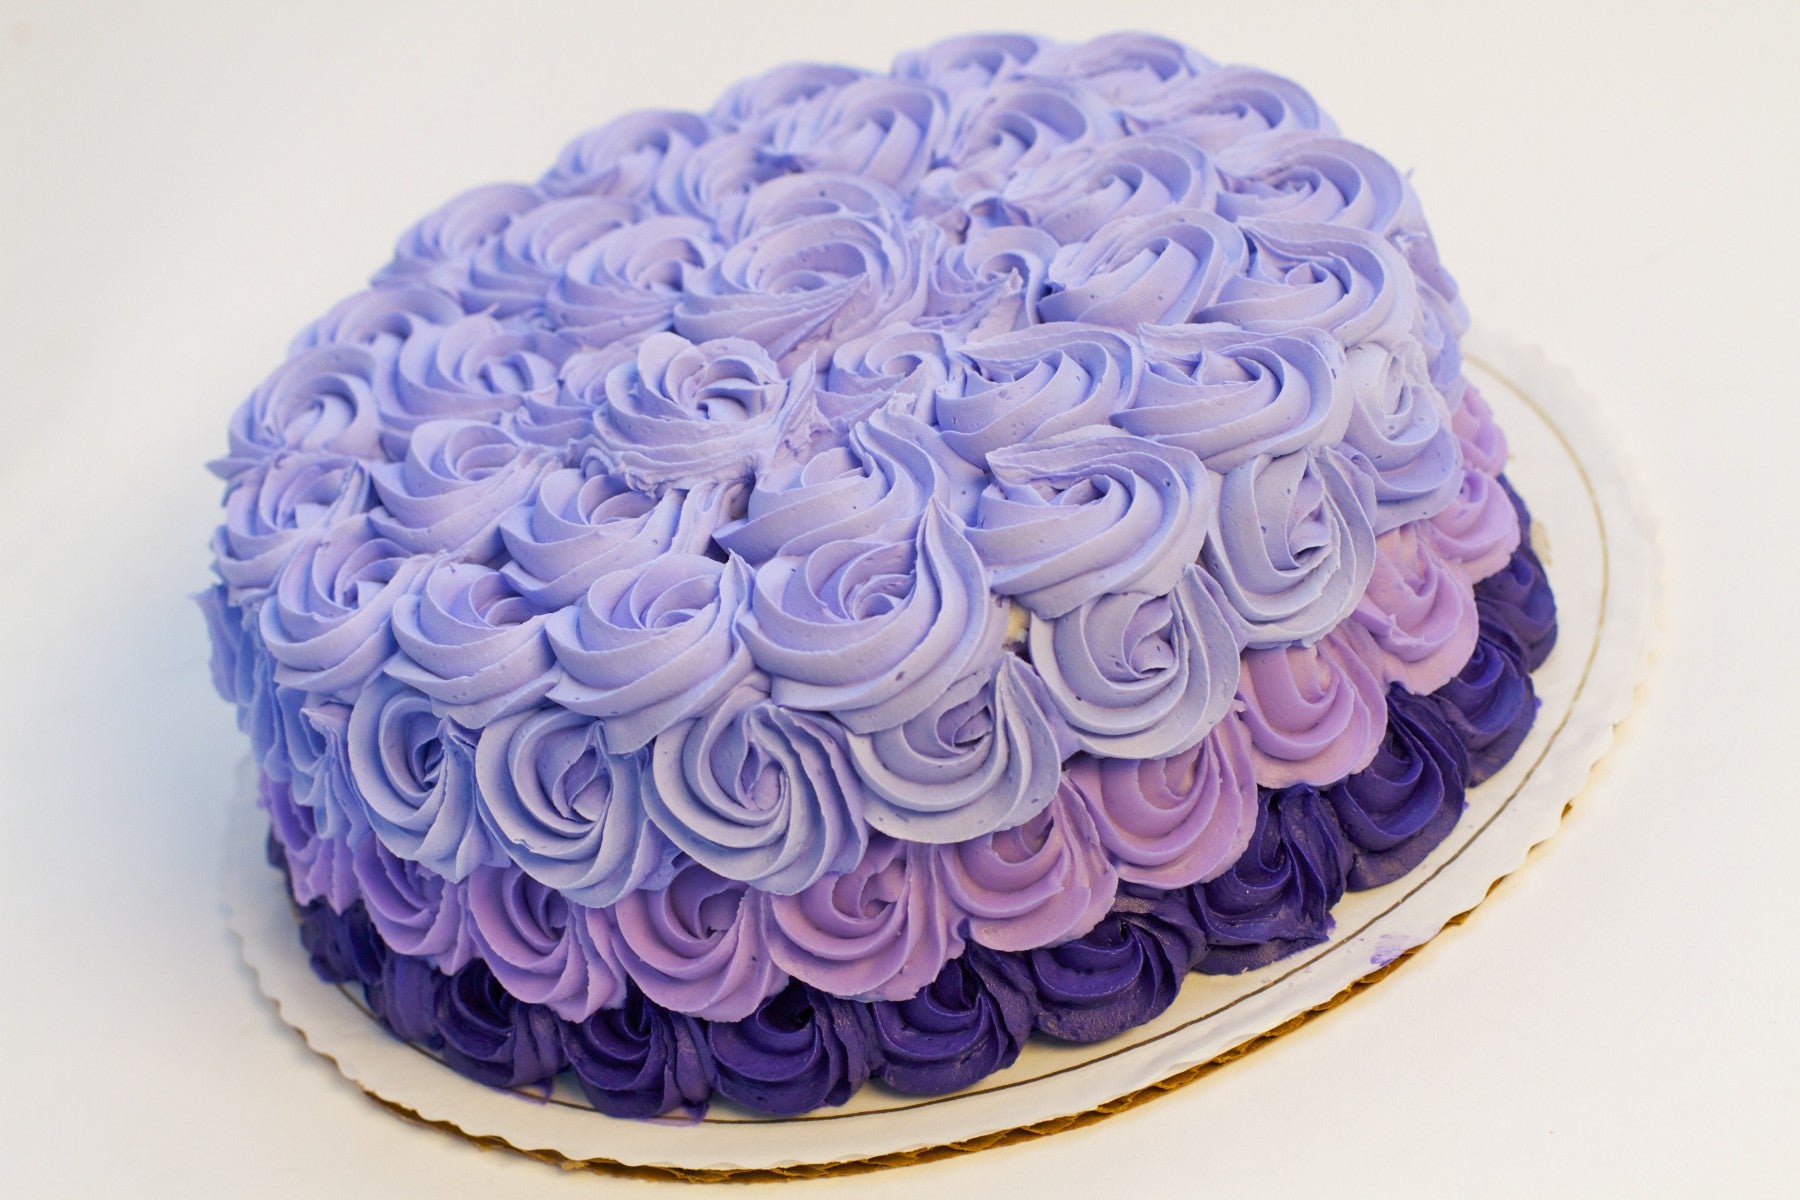 The Bake More: First Ombre Cake